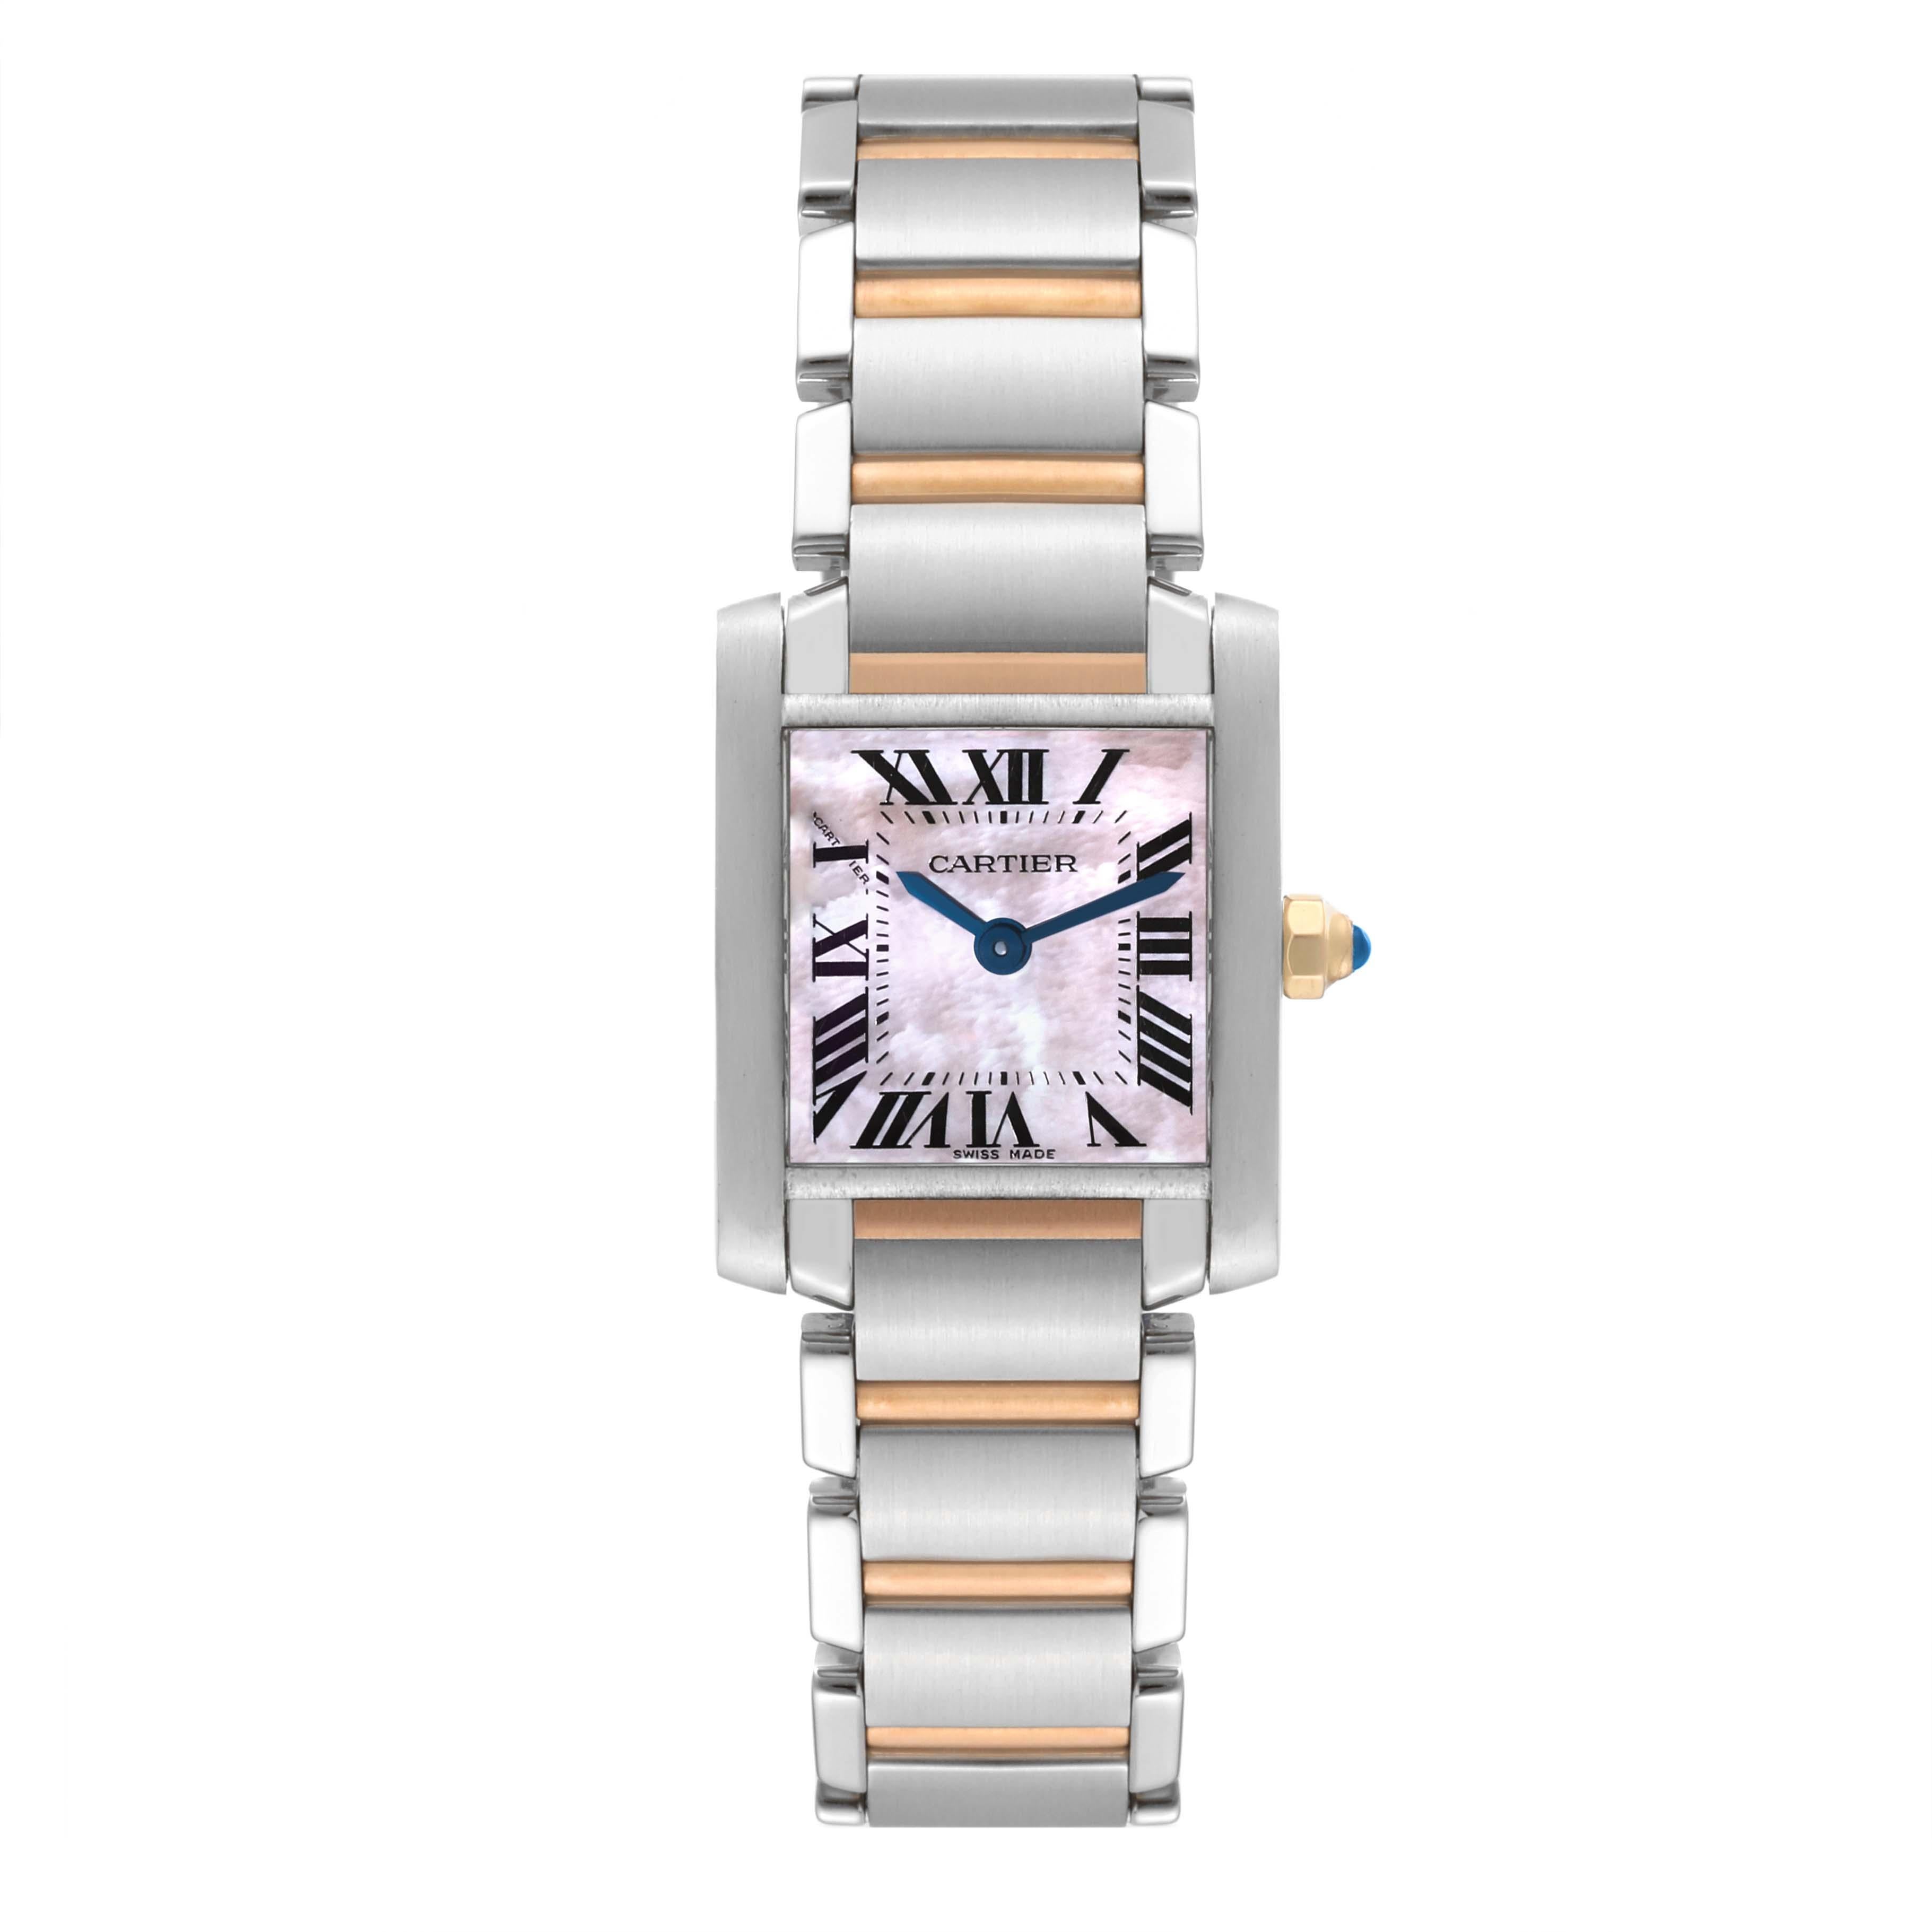 Cartier Tank Francaise Steel Rose Gold Mother of Pearl Ladies Watch W51027Q4 2